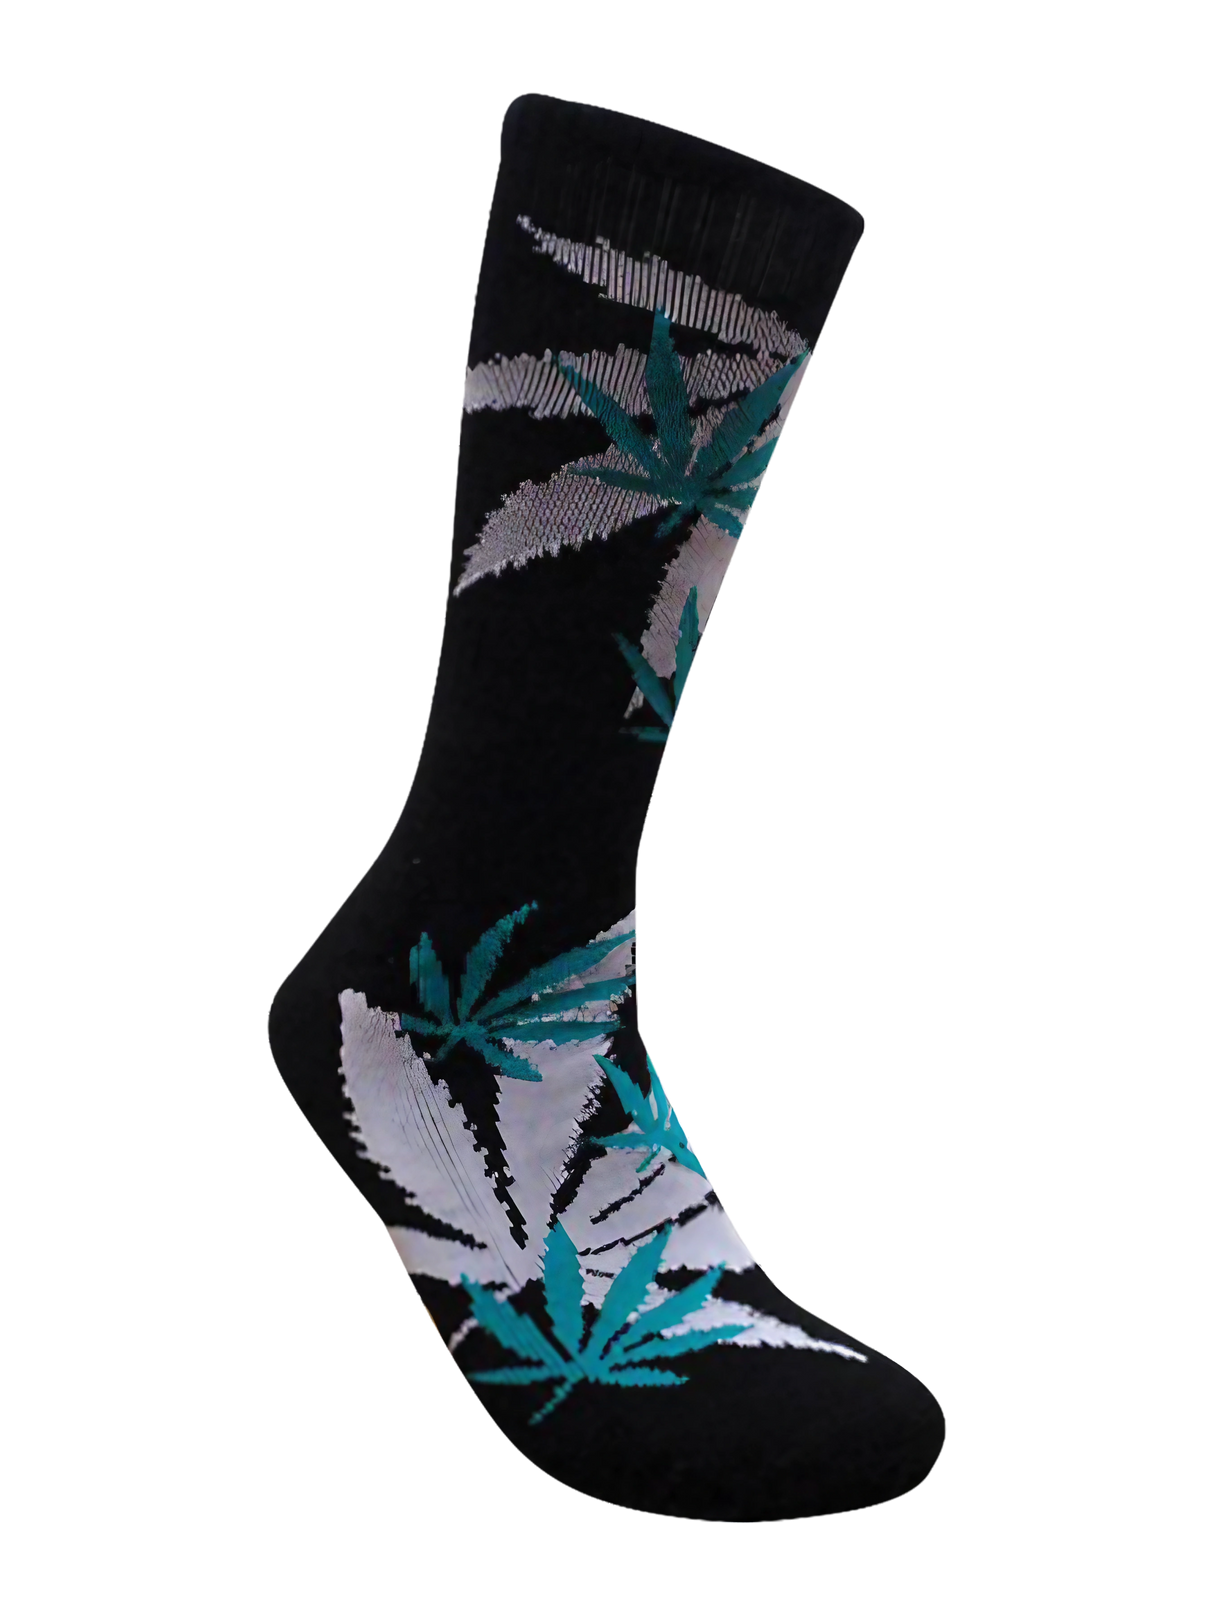 Leaf Republic Weed Socks featuring cannabis leaf design, comfortable fit, side view